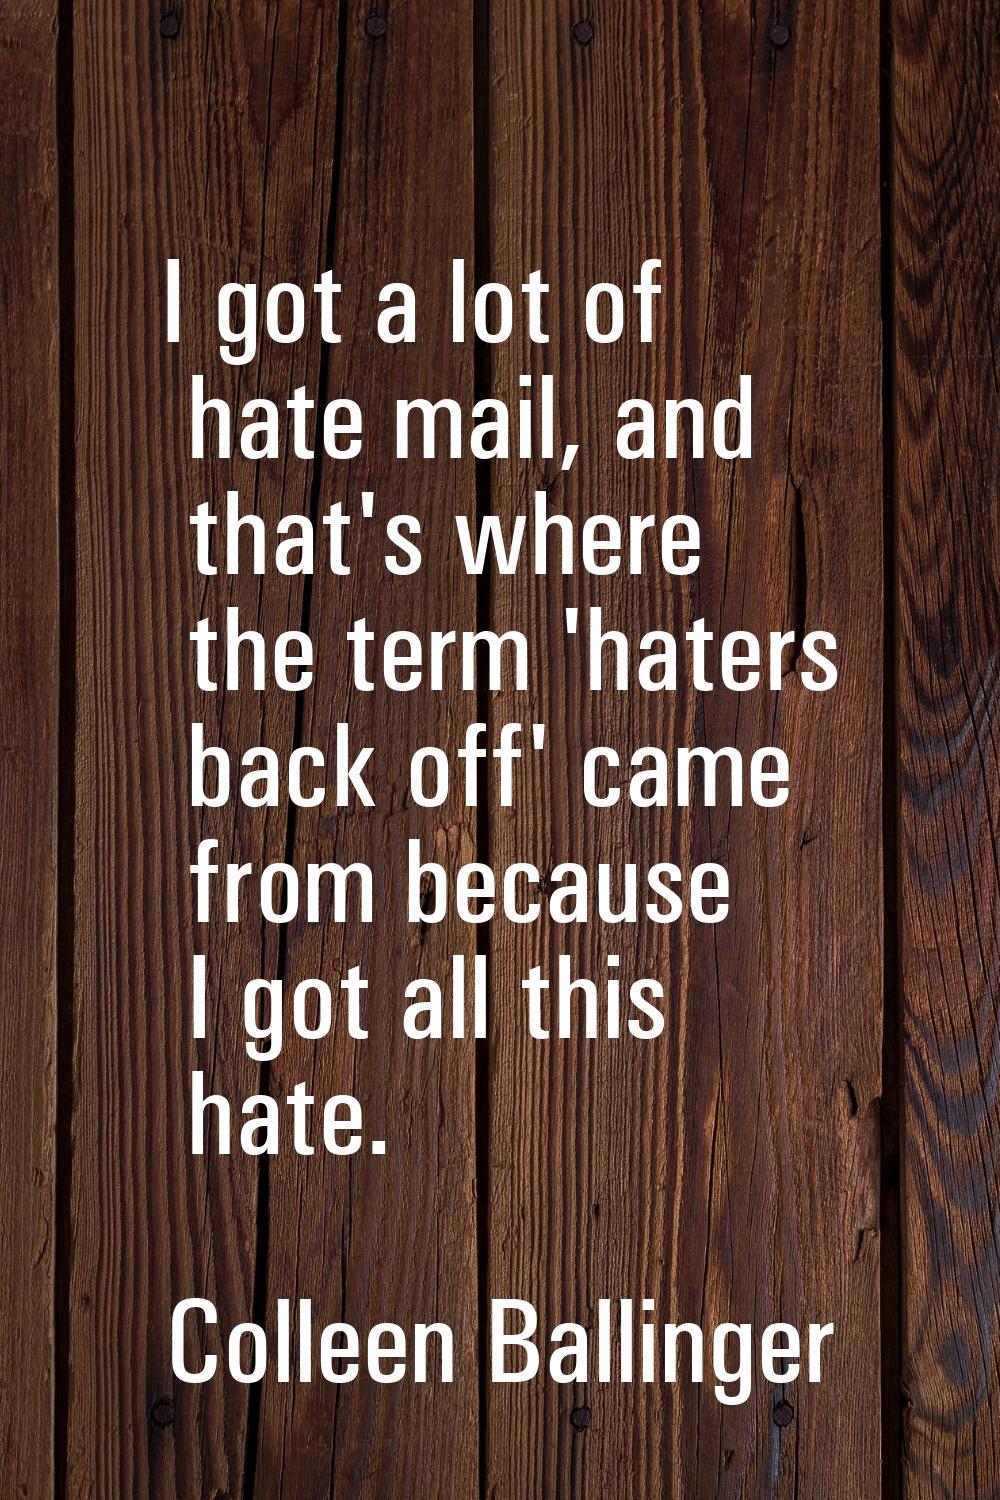 I got a lot of hate mail, and that's where the term 'haters back off' came from because I got all t